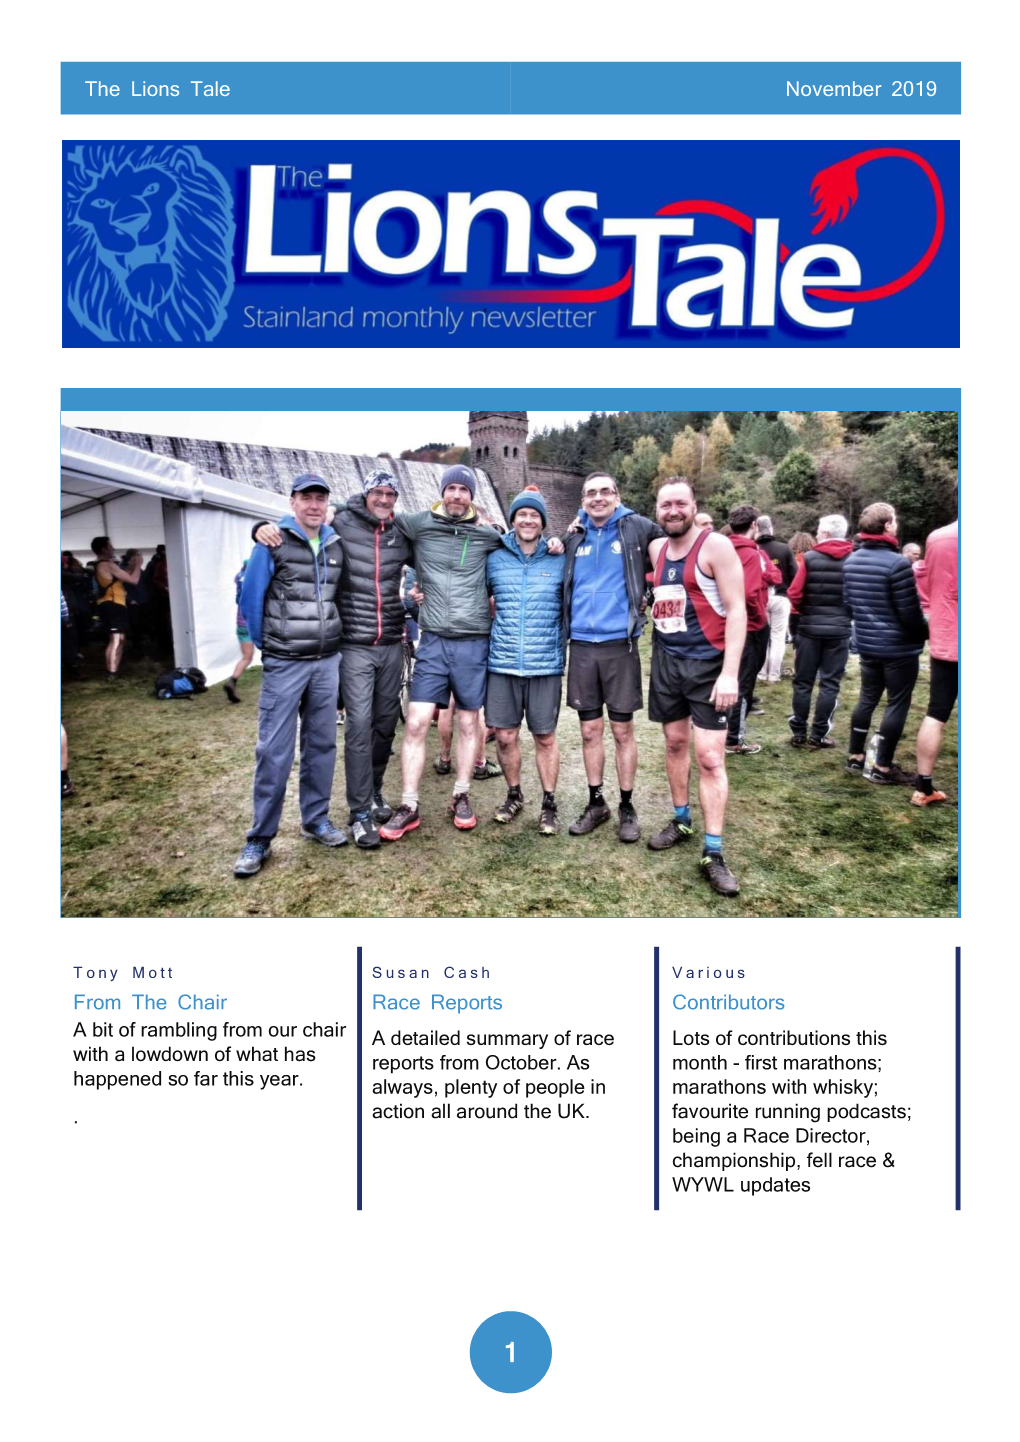 The Lions Tale November 2019 from the Chair a Bit of Rambling from Our